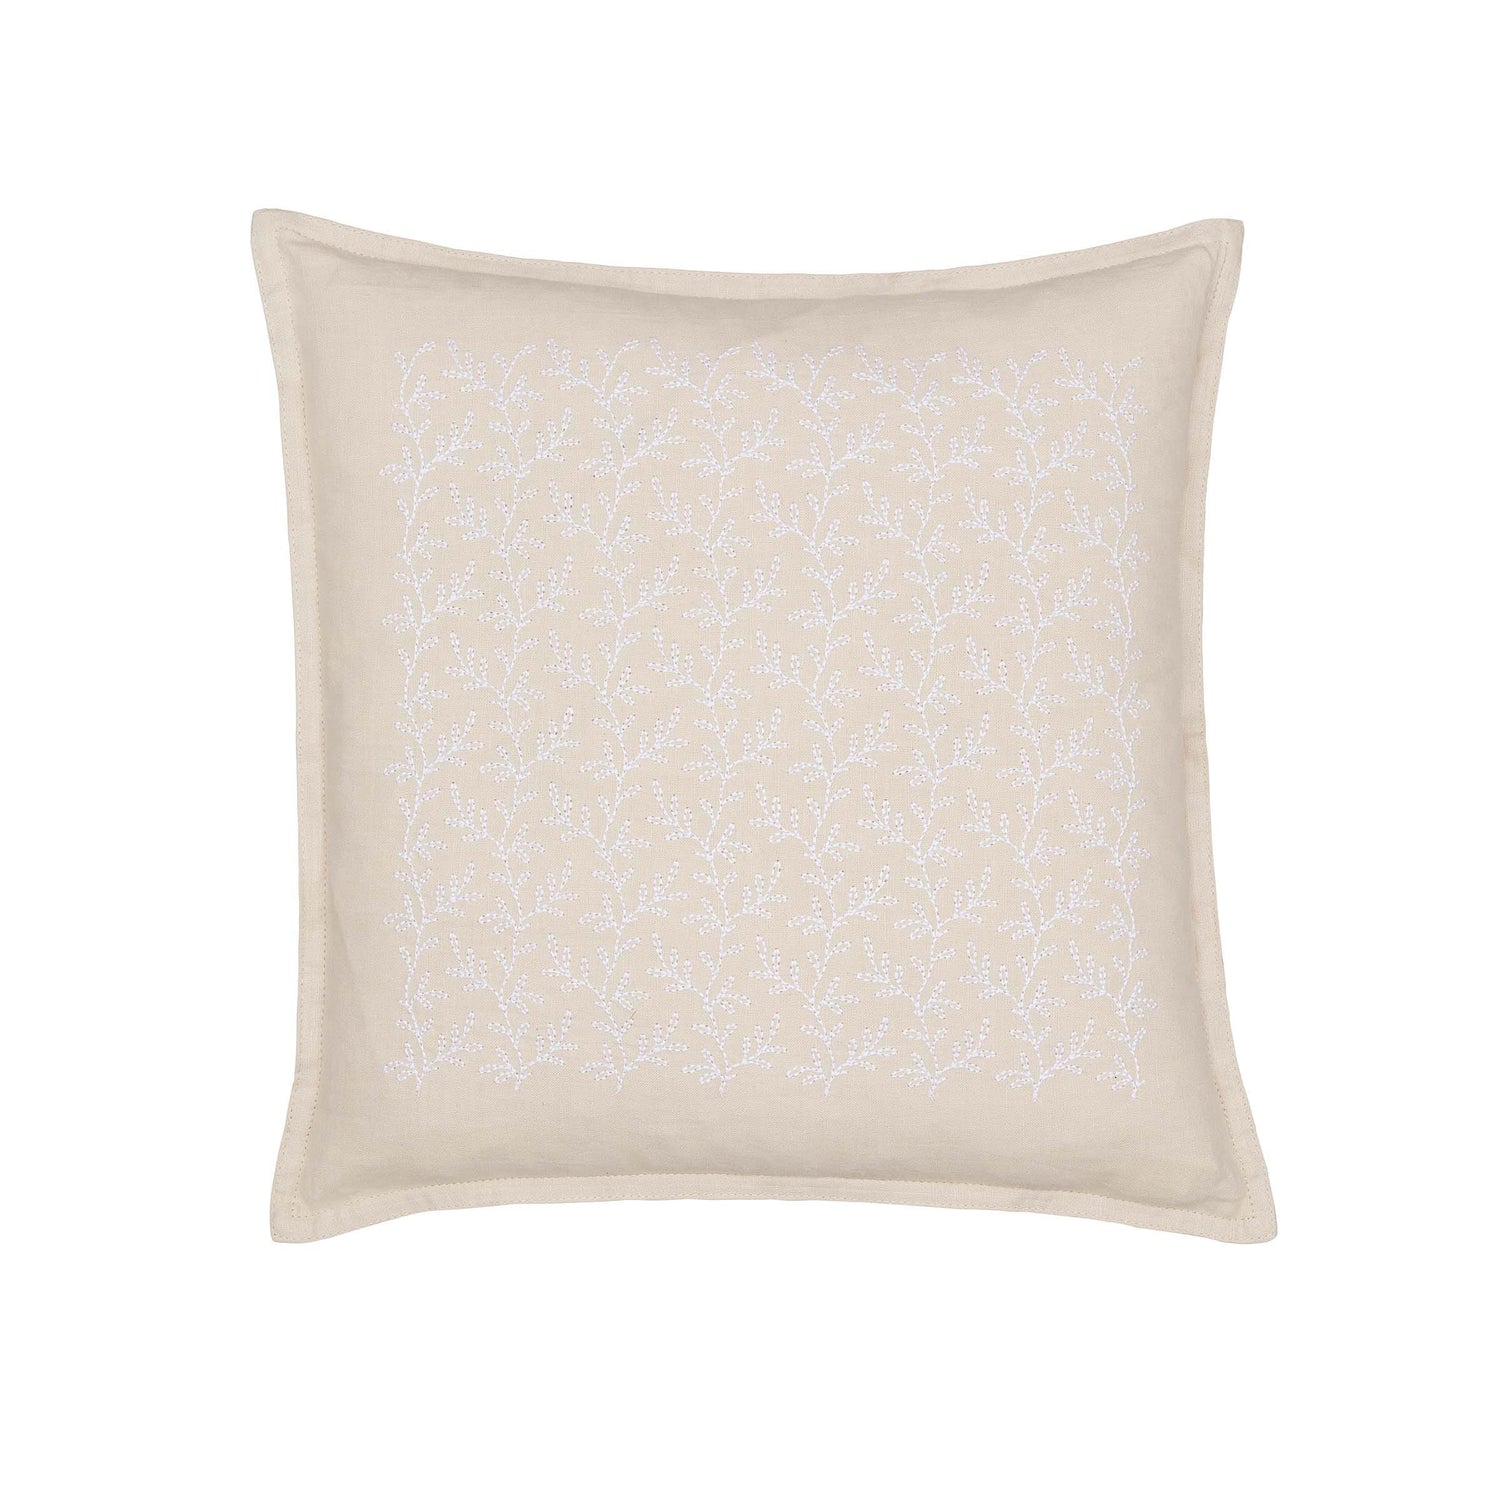 Embroidered Thyme Cushion in Linen